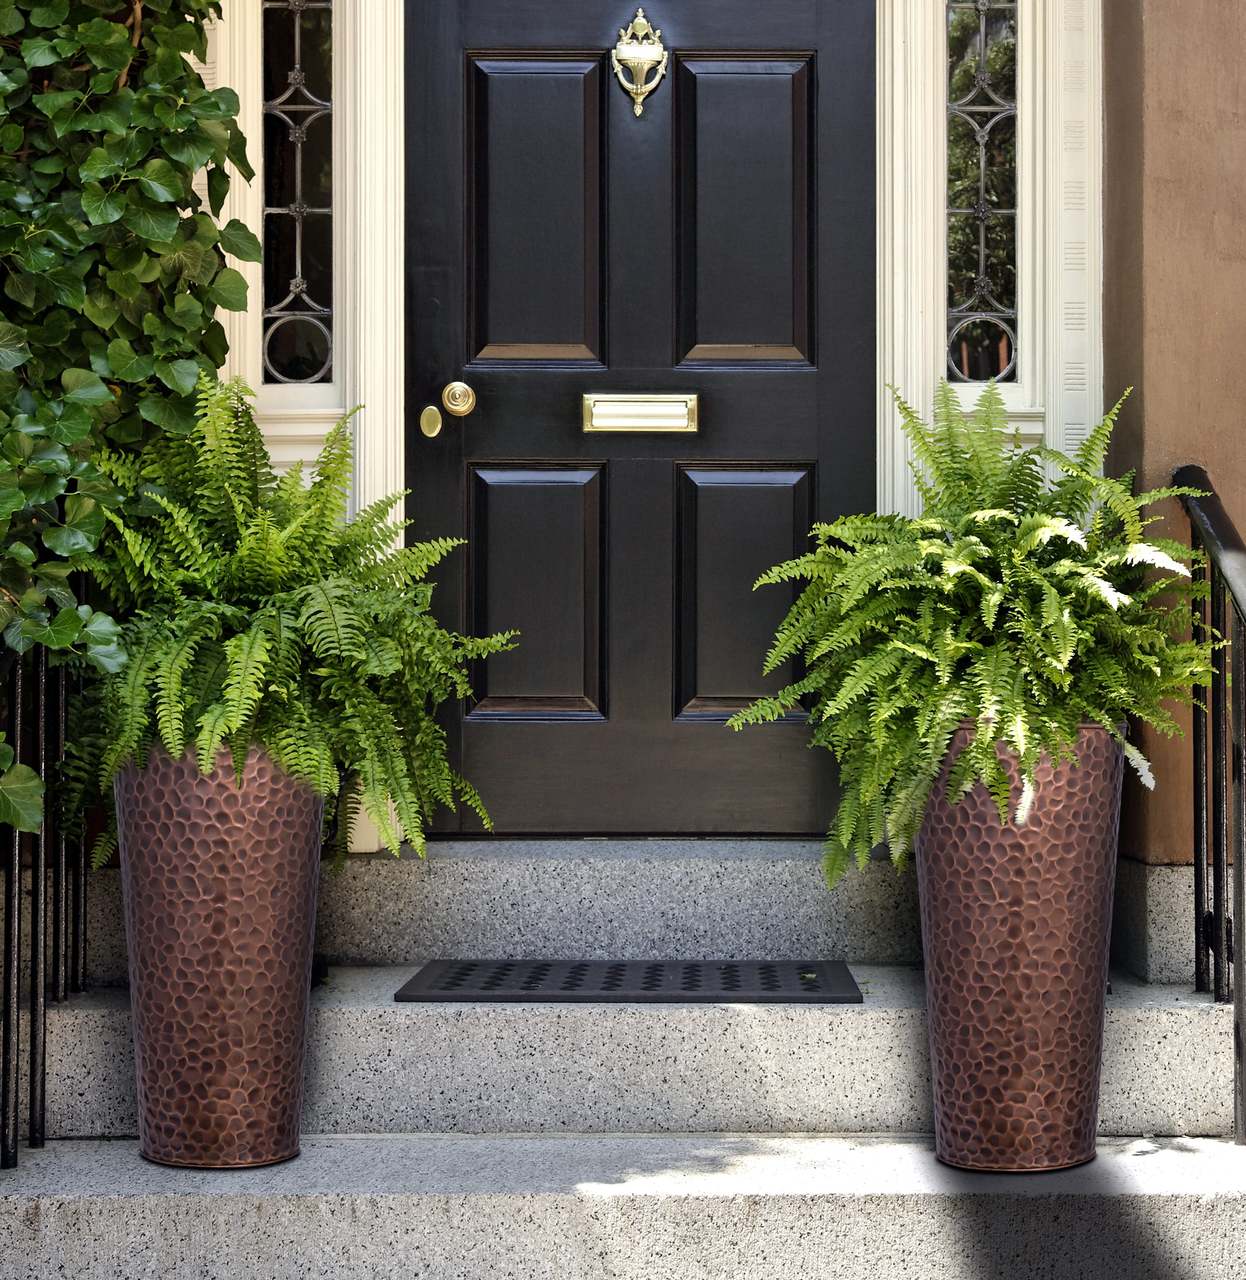 H Potter tall entryway planters